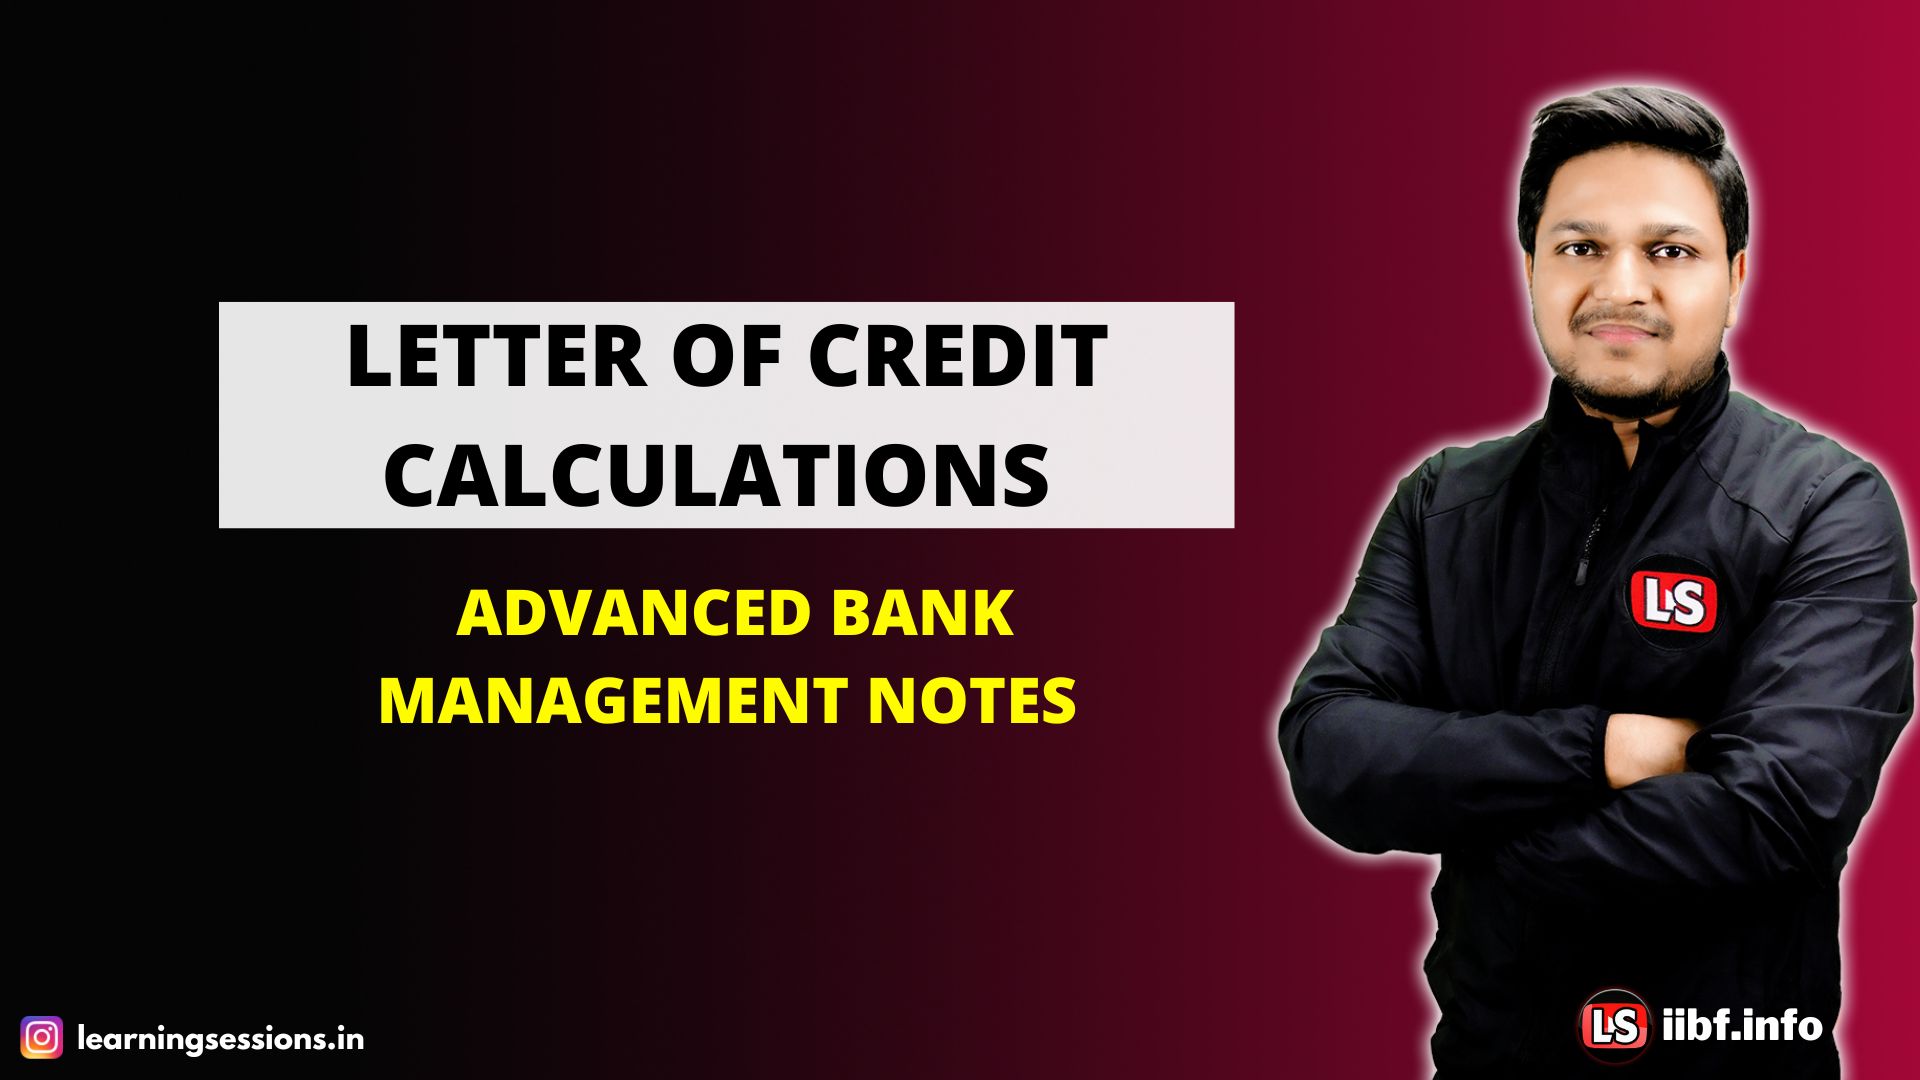 LETTER OF CREDIT CALCULATIONS | ADVANCED BANK MANAGEMENT NOTES